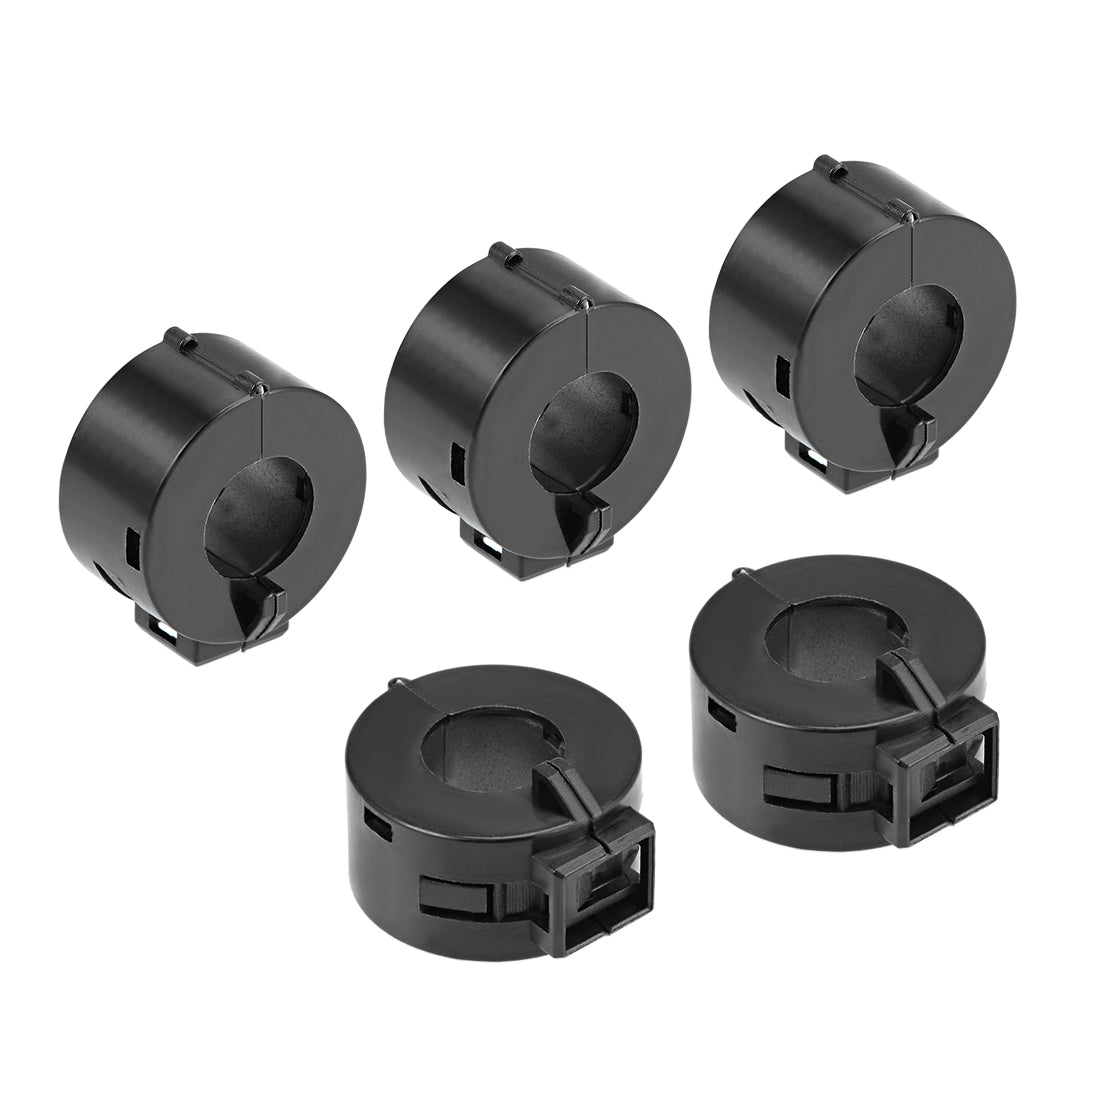 uxcell Uxcell 15mm Ferrite Cores Ring Clip-On RFI EMI Noise Suppression Filter Cable Clip, Black 5pcs